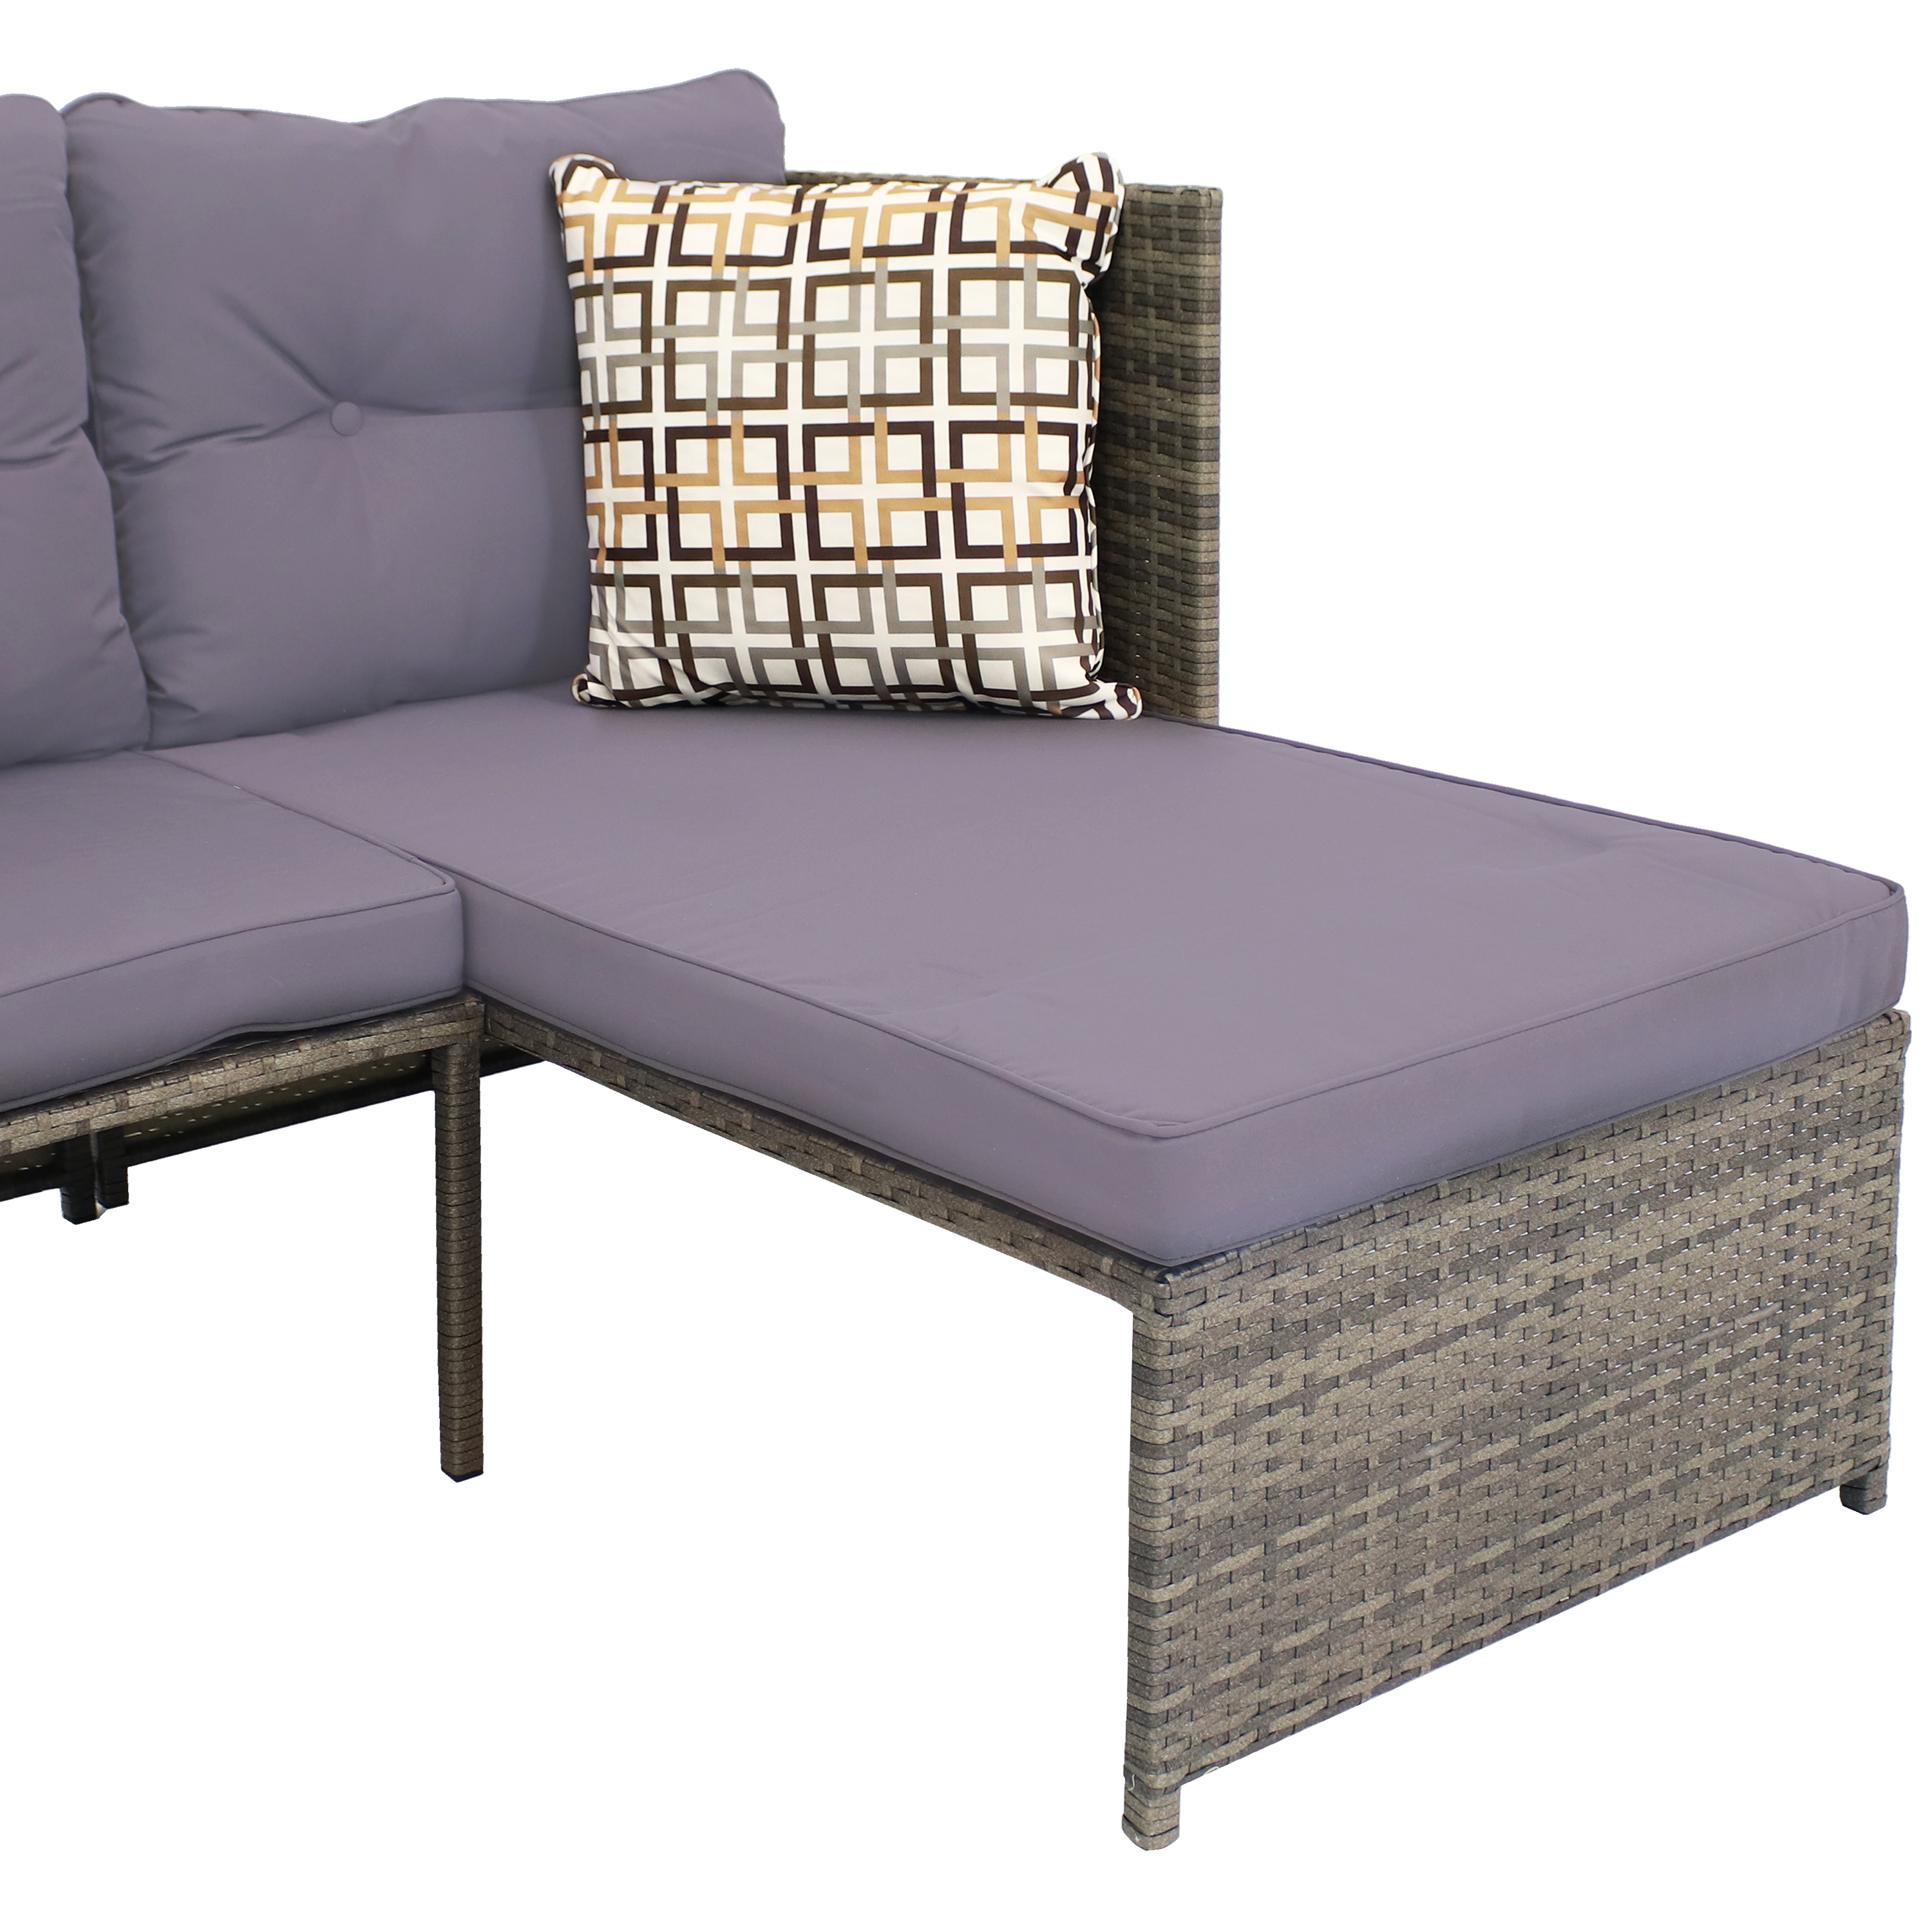 Sunnydaze Longford Outdoor Patio Sectional Sofa Set with Cushions - Charcoal - image 5 of 12